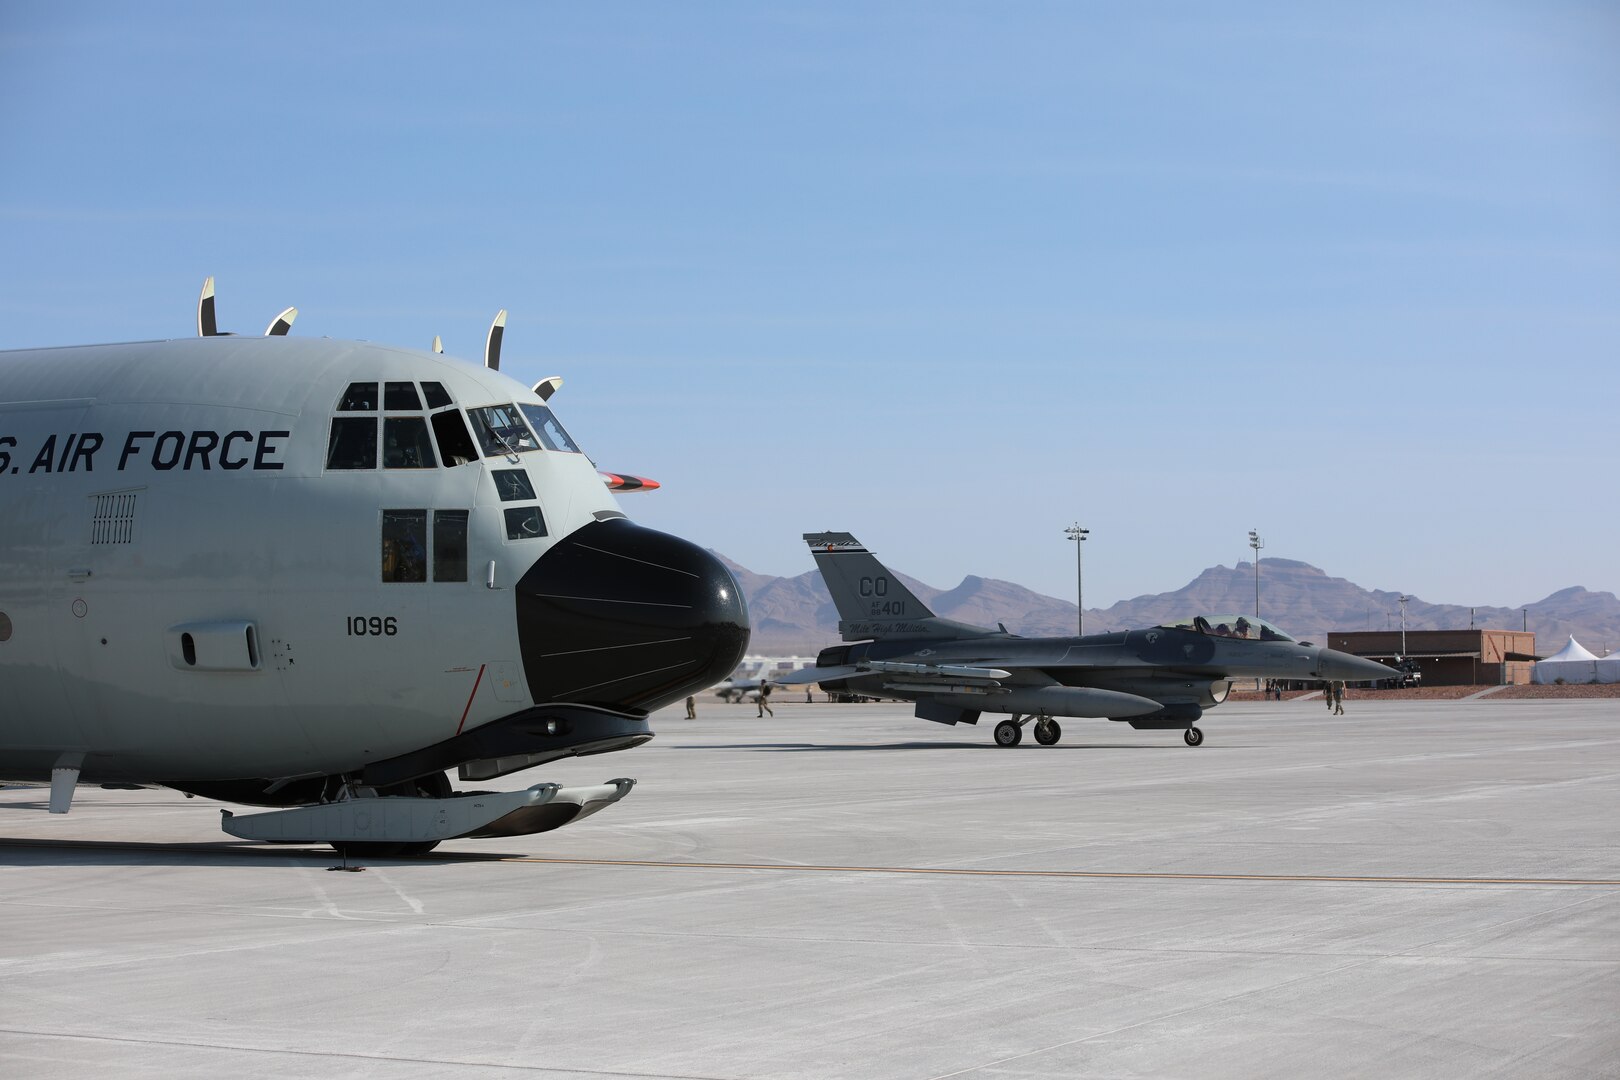 Elements of the 109th Airlift wing participate in a joint exercise at Nellis Air Force Base in Las Vegas demonstrating the capability to establish and land at an austere landing area, secured by the 321st Contingency Response Squadron, carrying ordinance for rearming F-16 fighter jets from the 140th fighter wing (Buckley AFB).